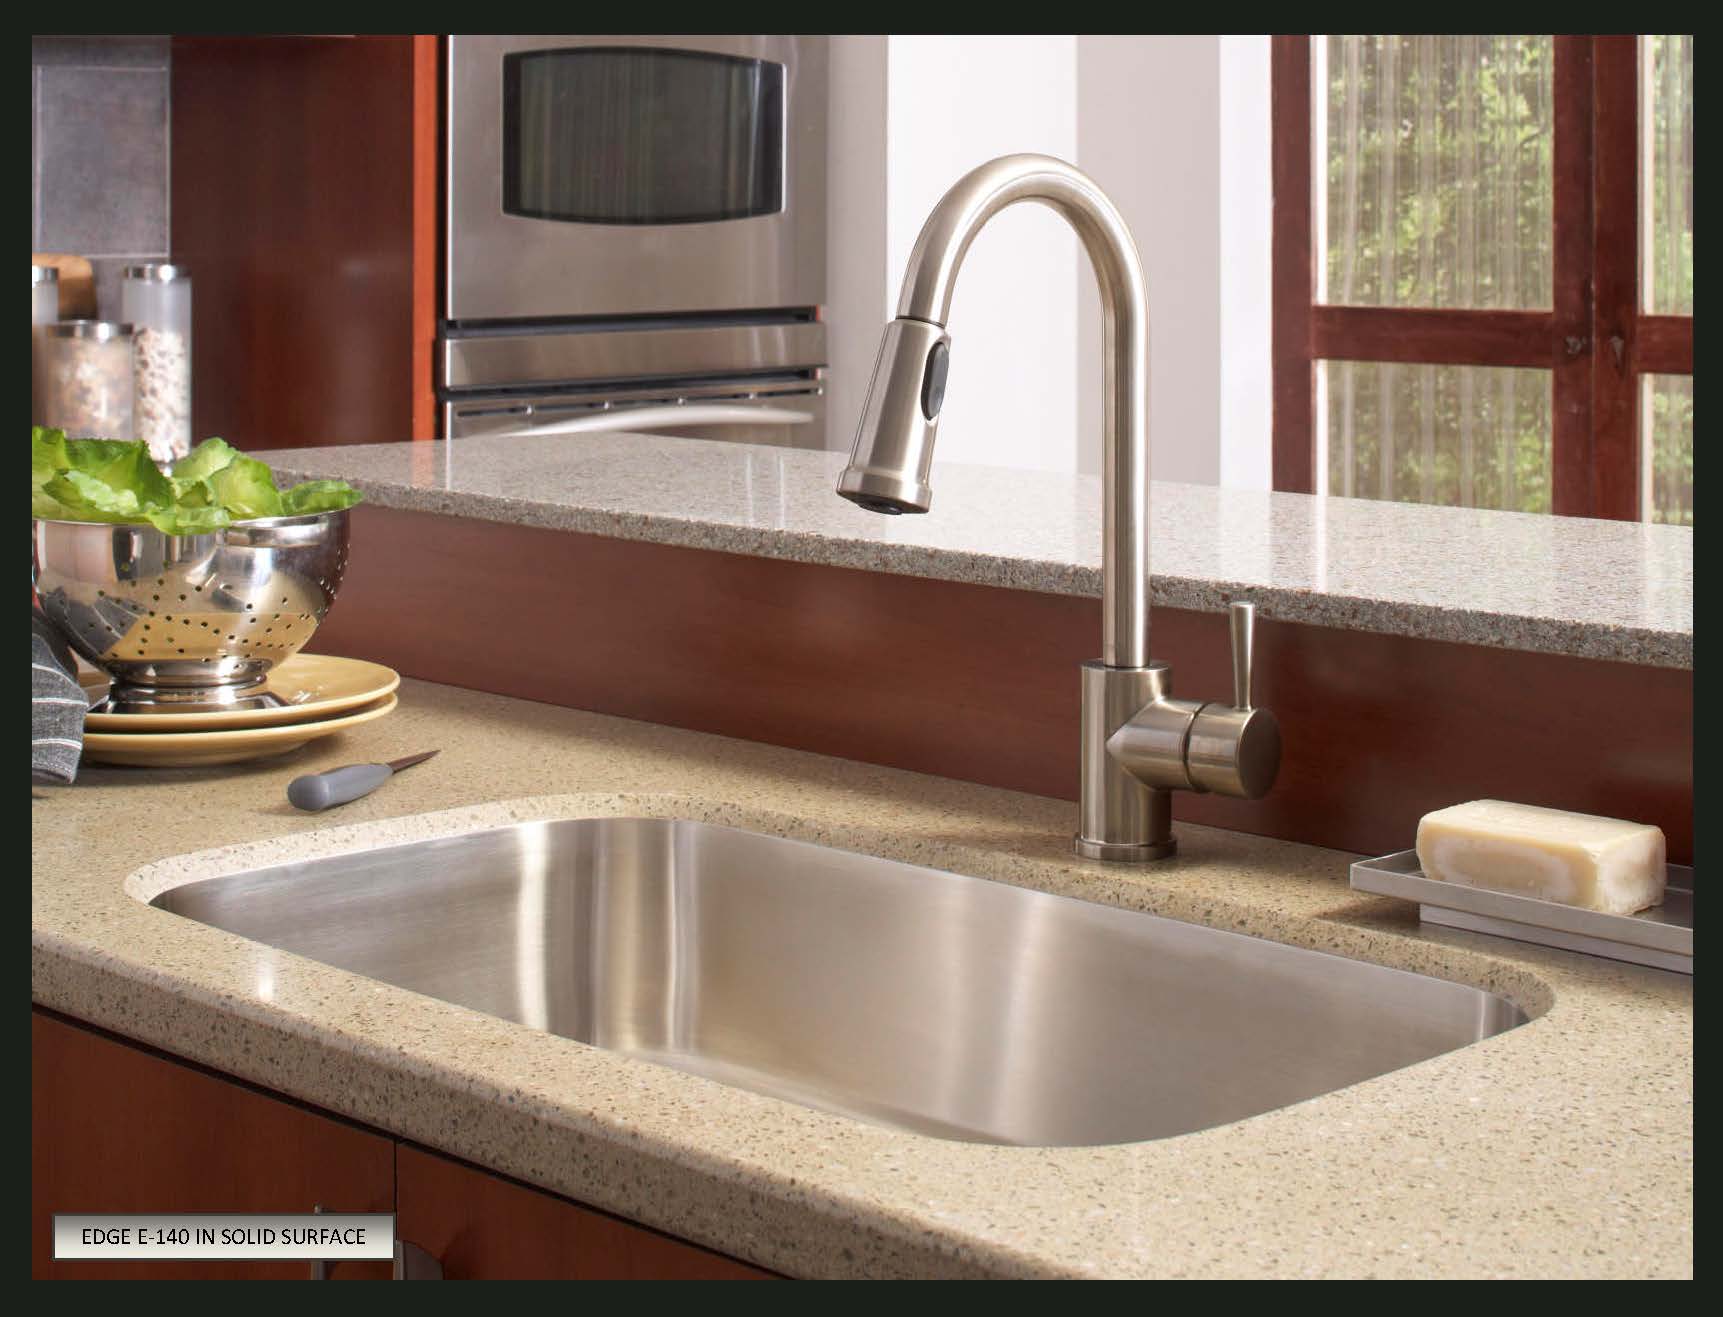 How to Choose a Sink For Solid Surface Countertops